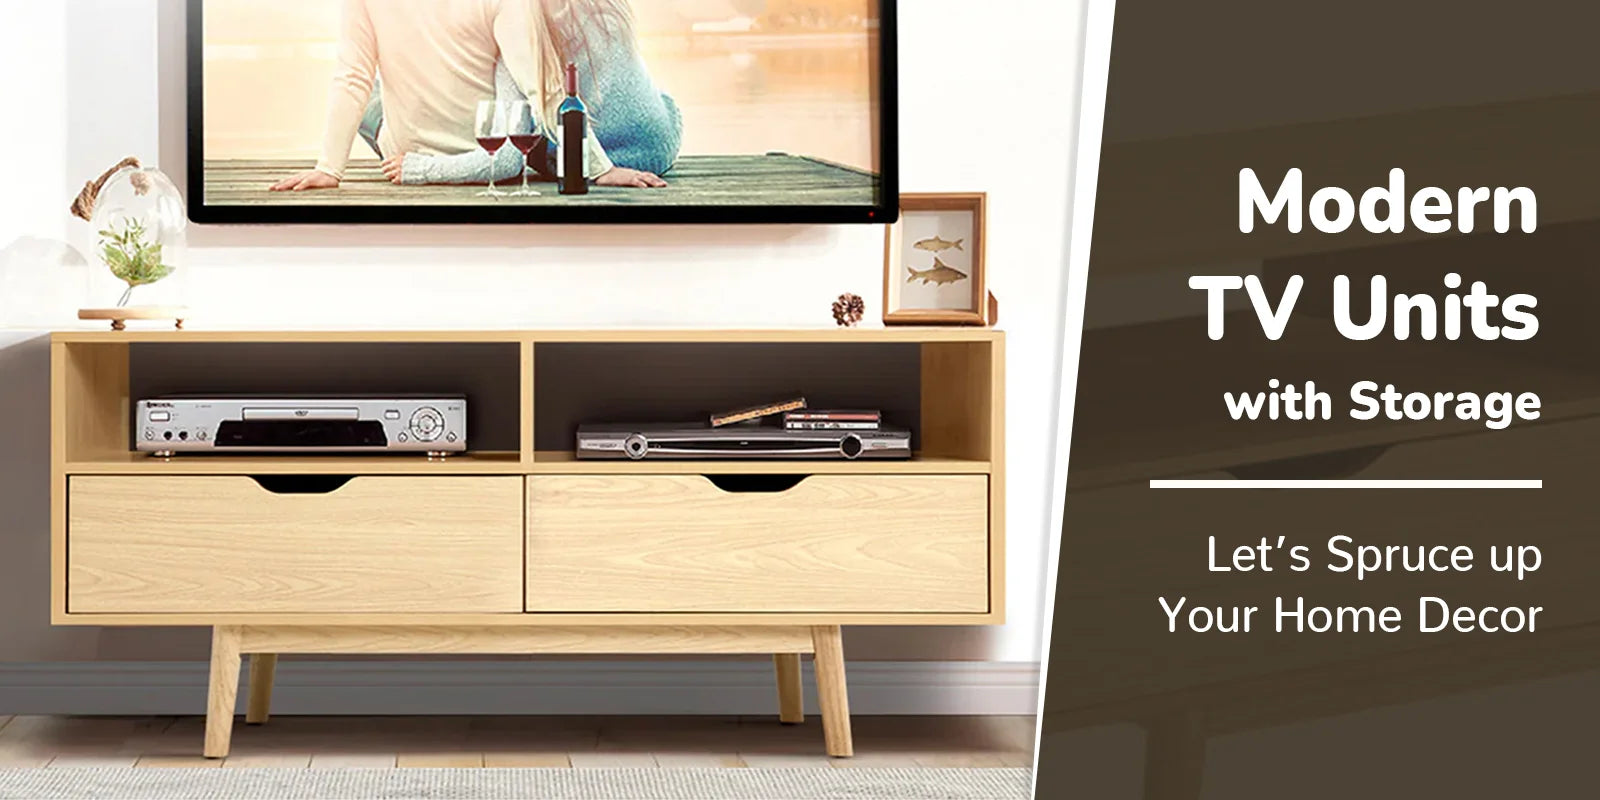 Modern TV Units with Storage: Let’s Spruce up Your Home Decor